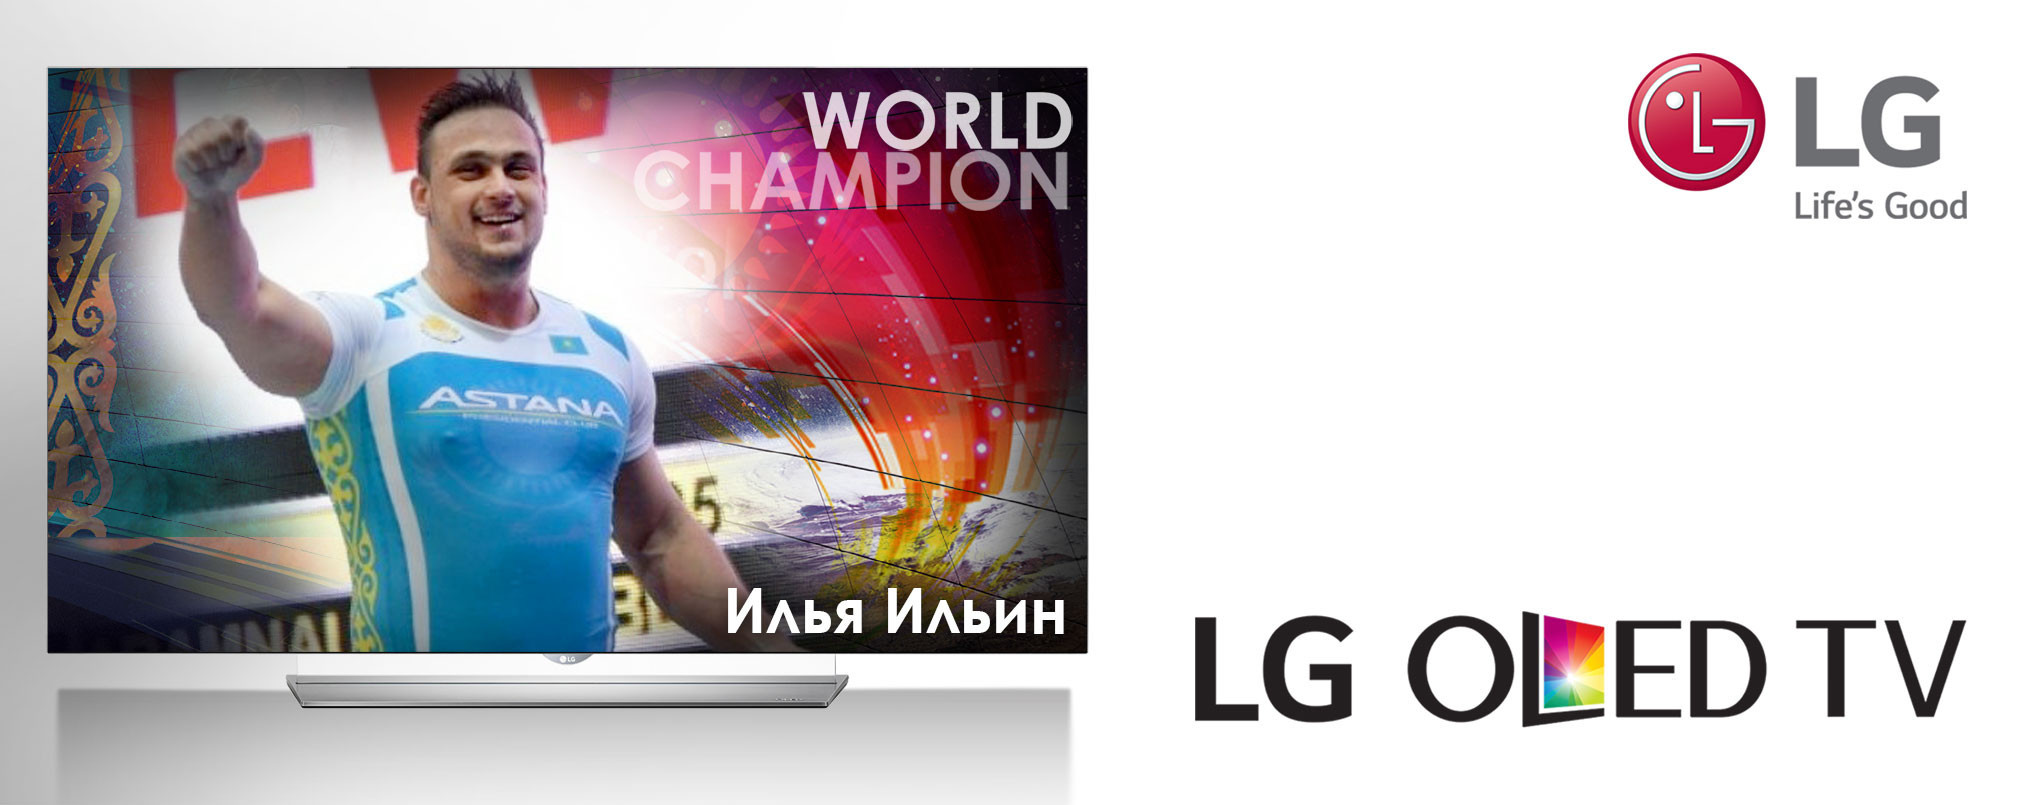 The popularity of Ilya Ilyin does not seem have been damaged by being stripped of two Olympic gold medals for doping and he continues to endorse products in his native Kazakhstan ©LG Electronics